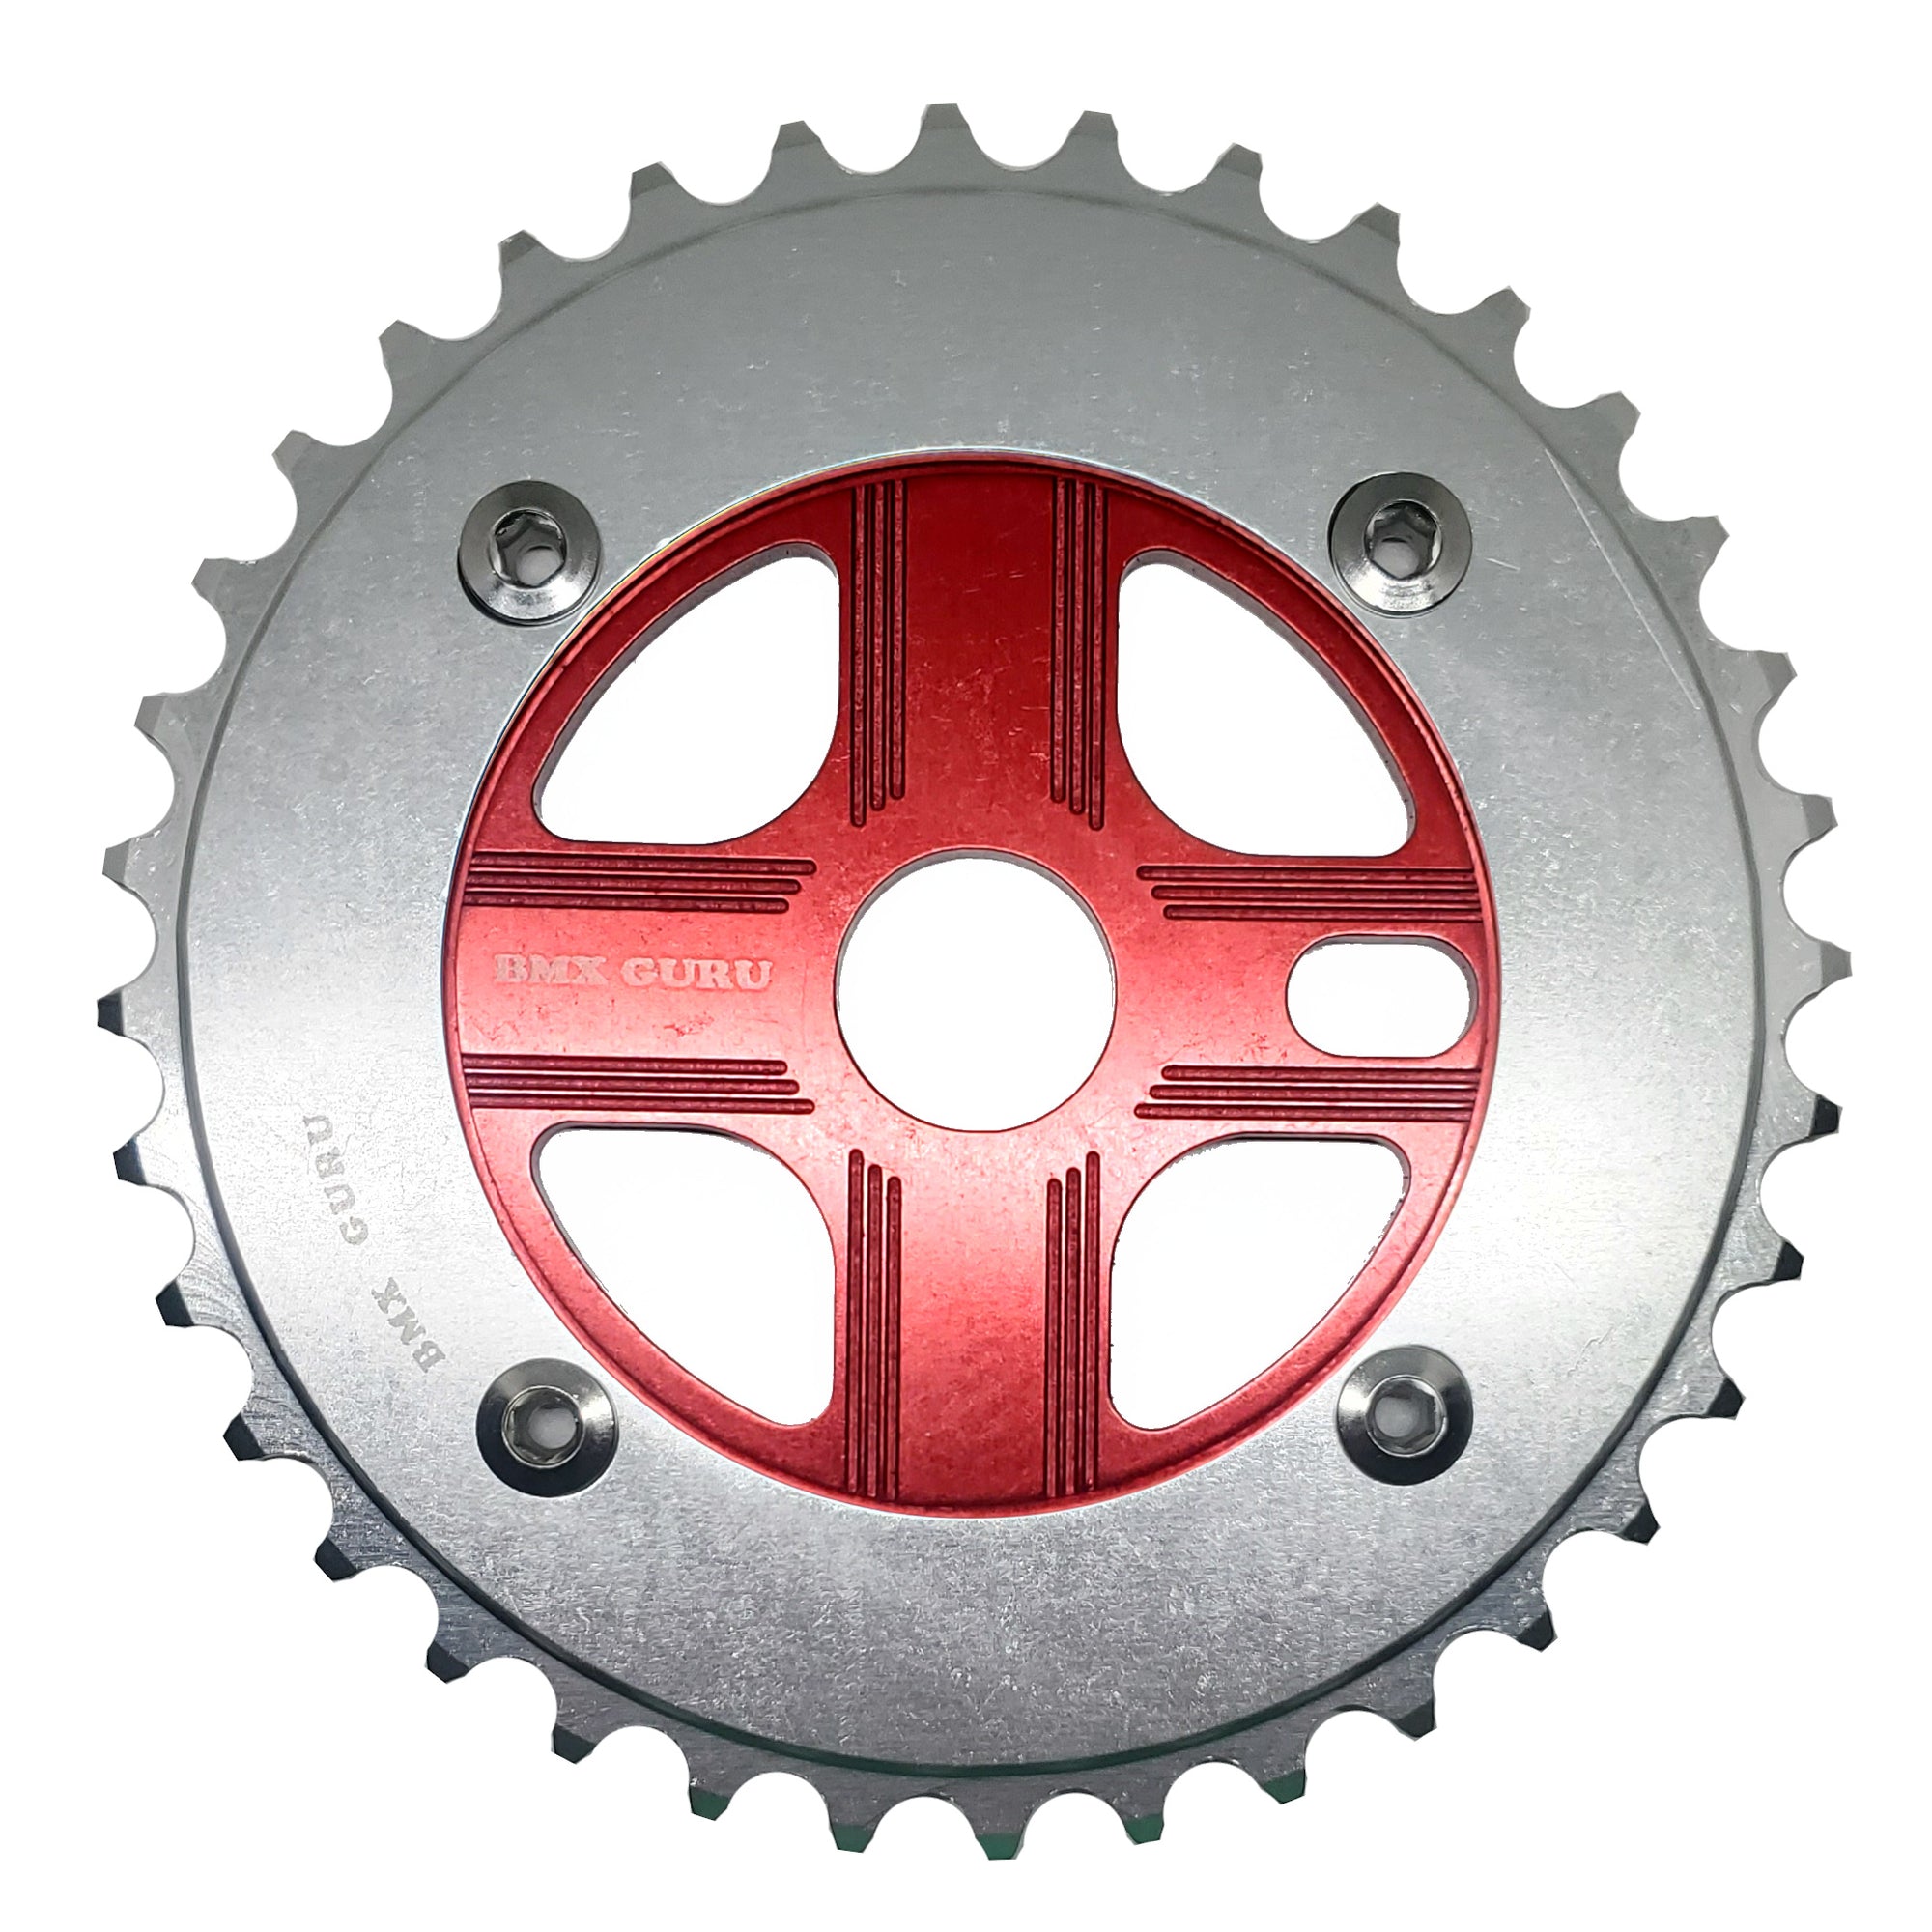 BMXGuru 36T Aluminum Spider & 4-bolt Chainring Combo - Silver over Red - USA Made